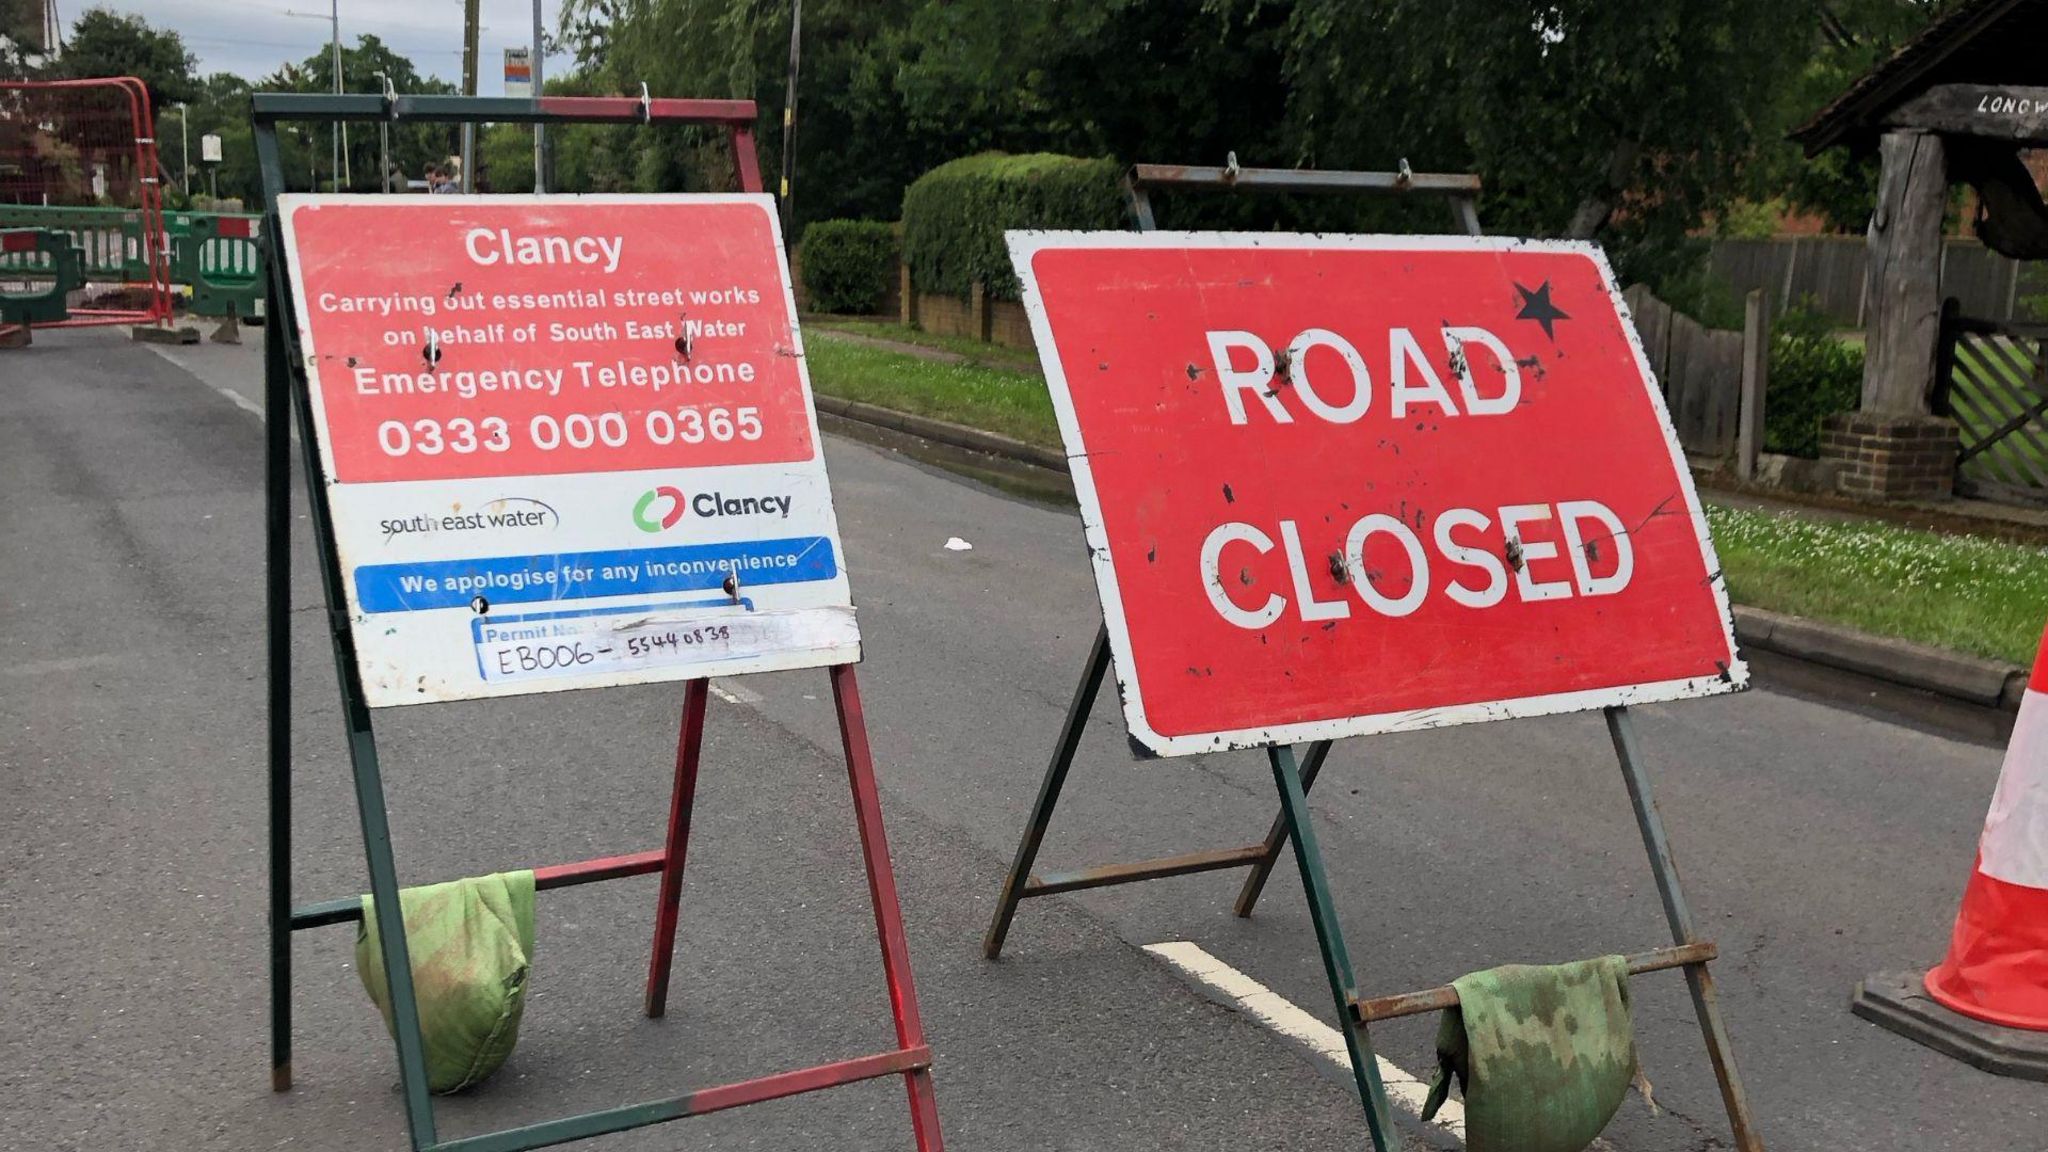 Two road signs indicating that a road is closed